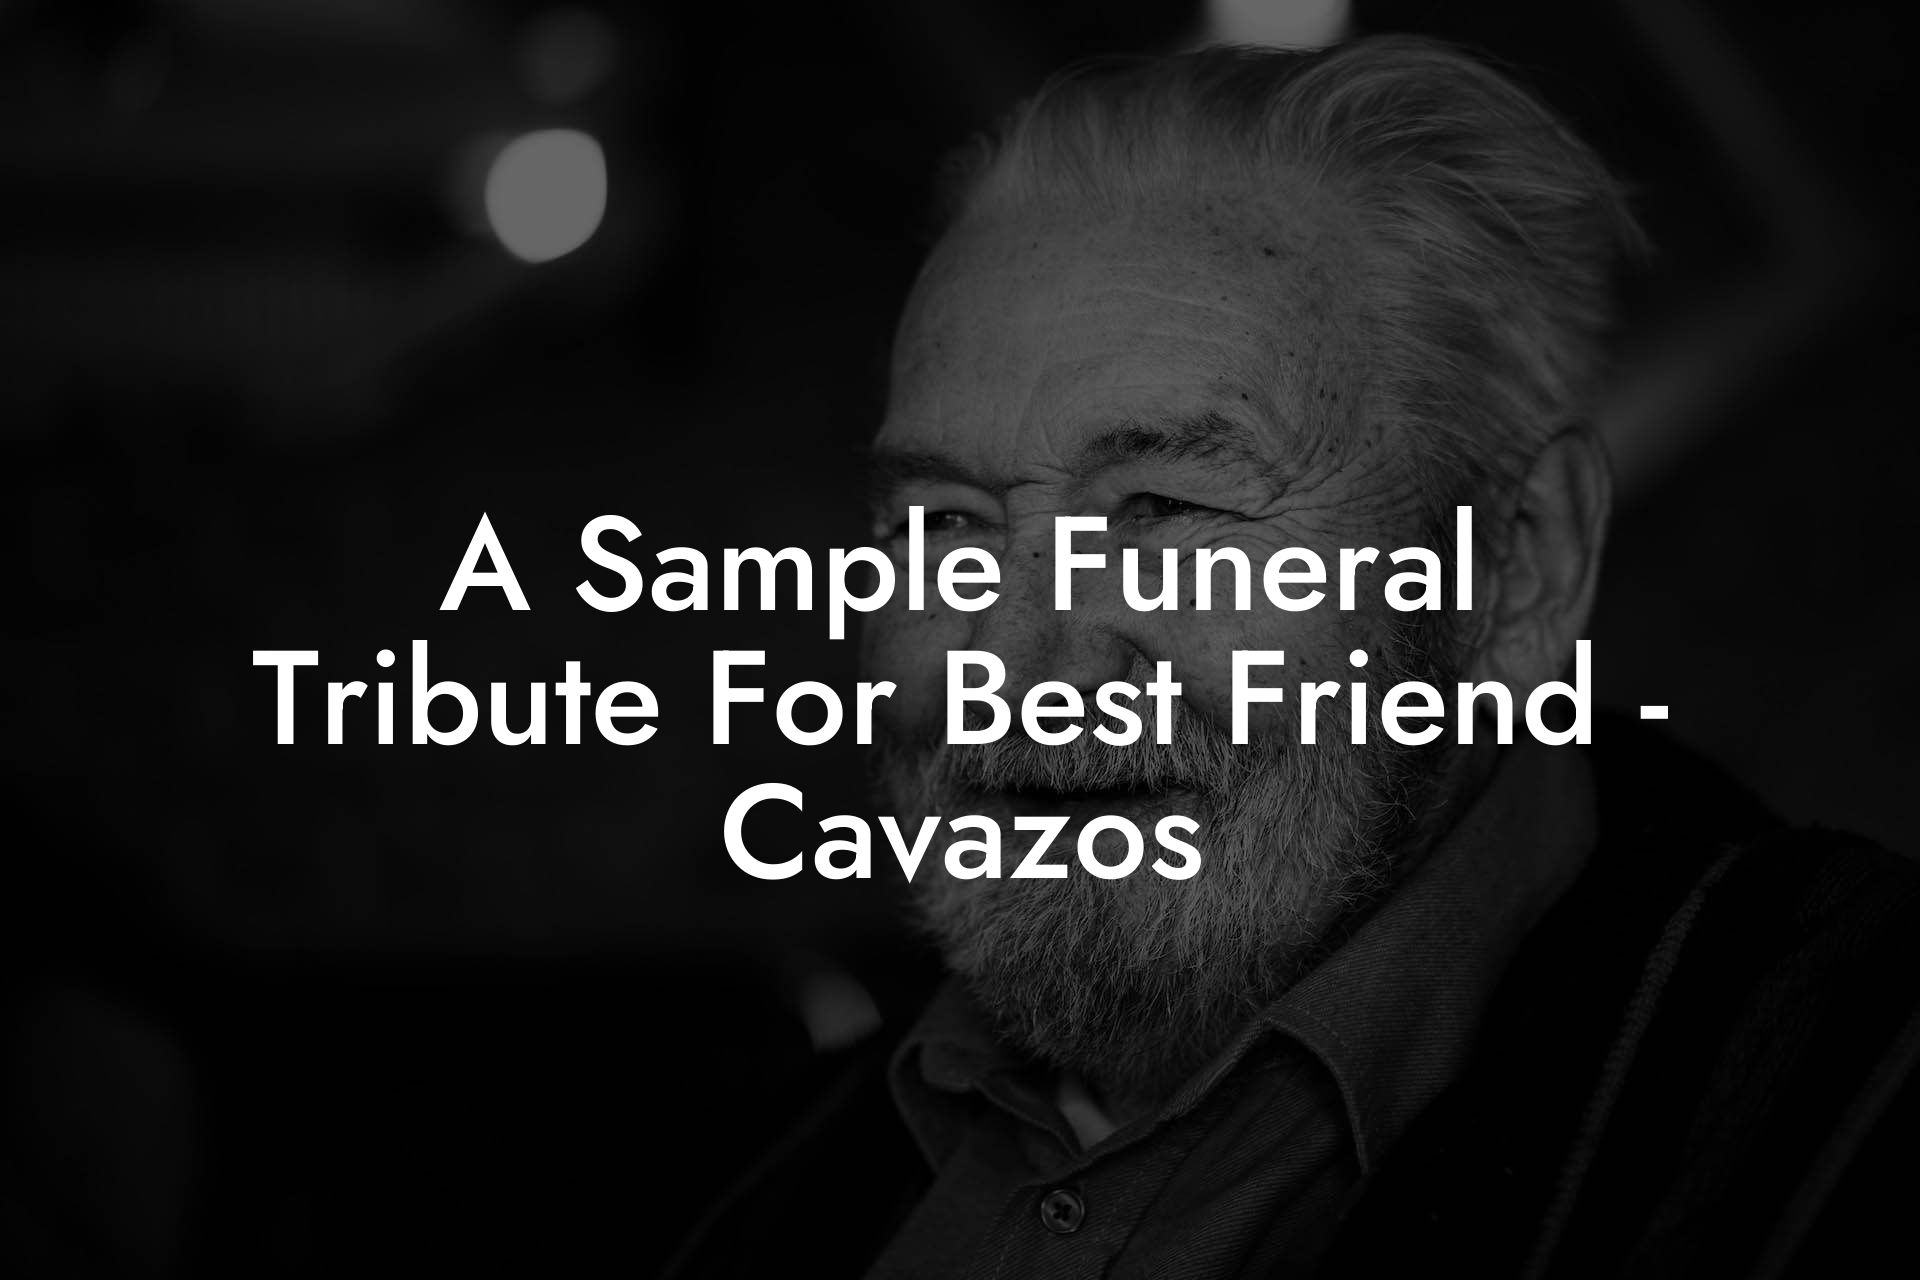 A Sample Funeral Tribute For Best Friend - Cavazos